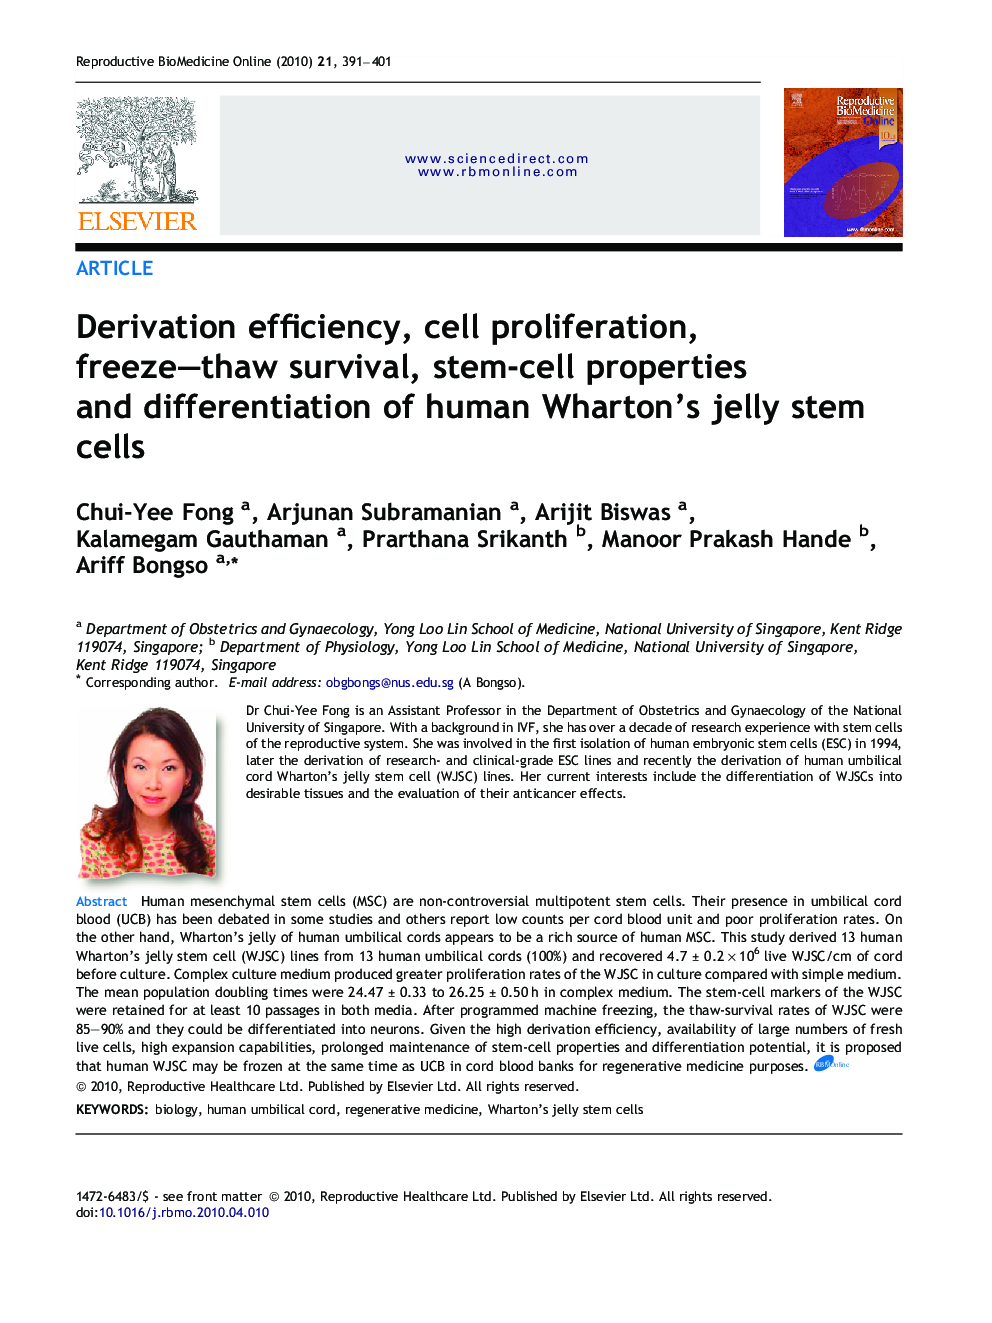 Derivation efficiency, cell proliferation, freeze–thaw survival, stem-cell properties and differentiation of human Wharton’s jelly stem cells 